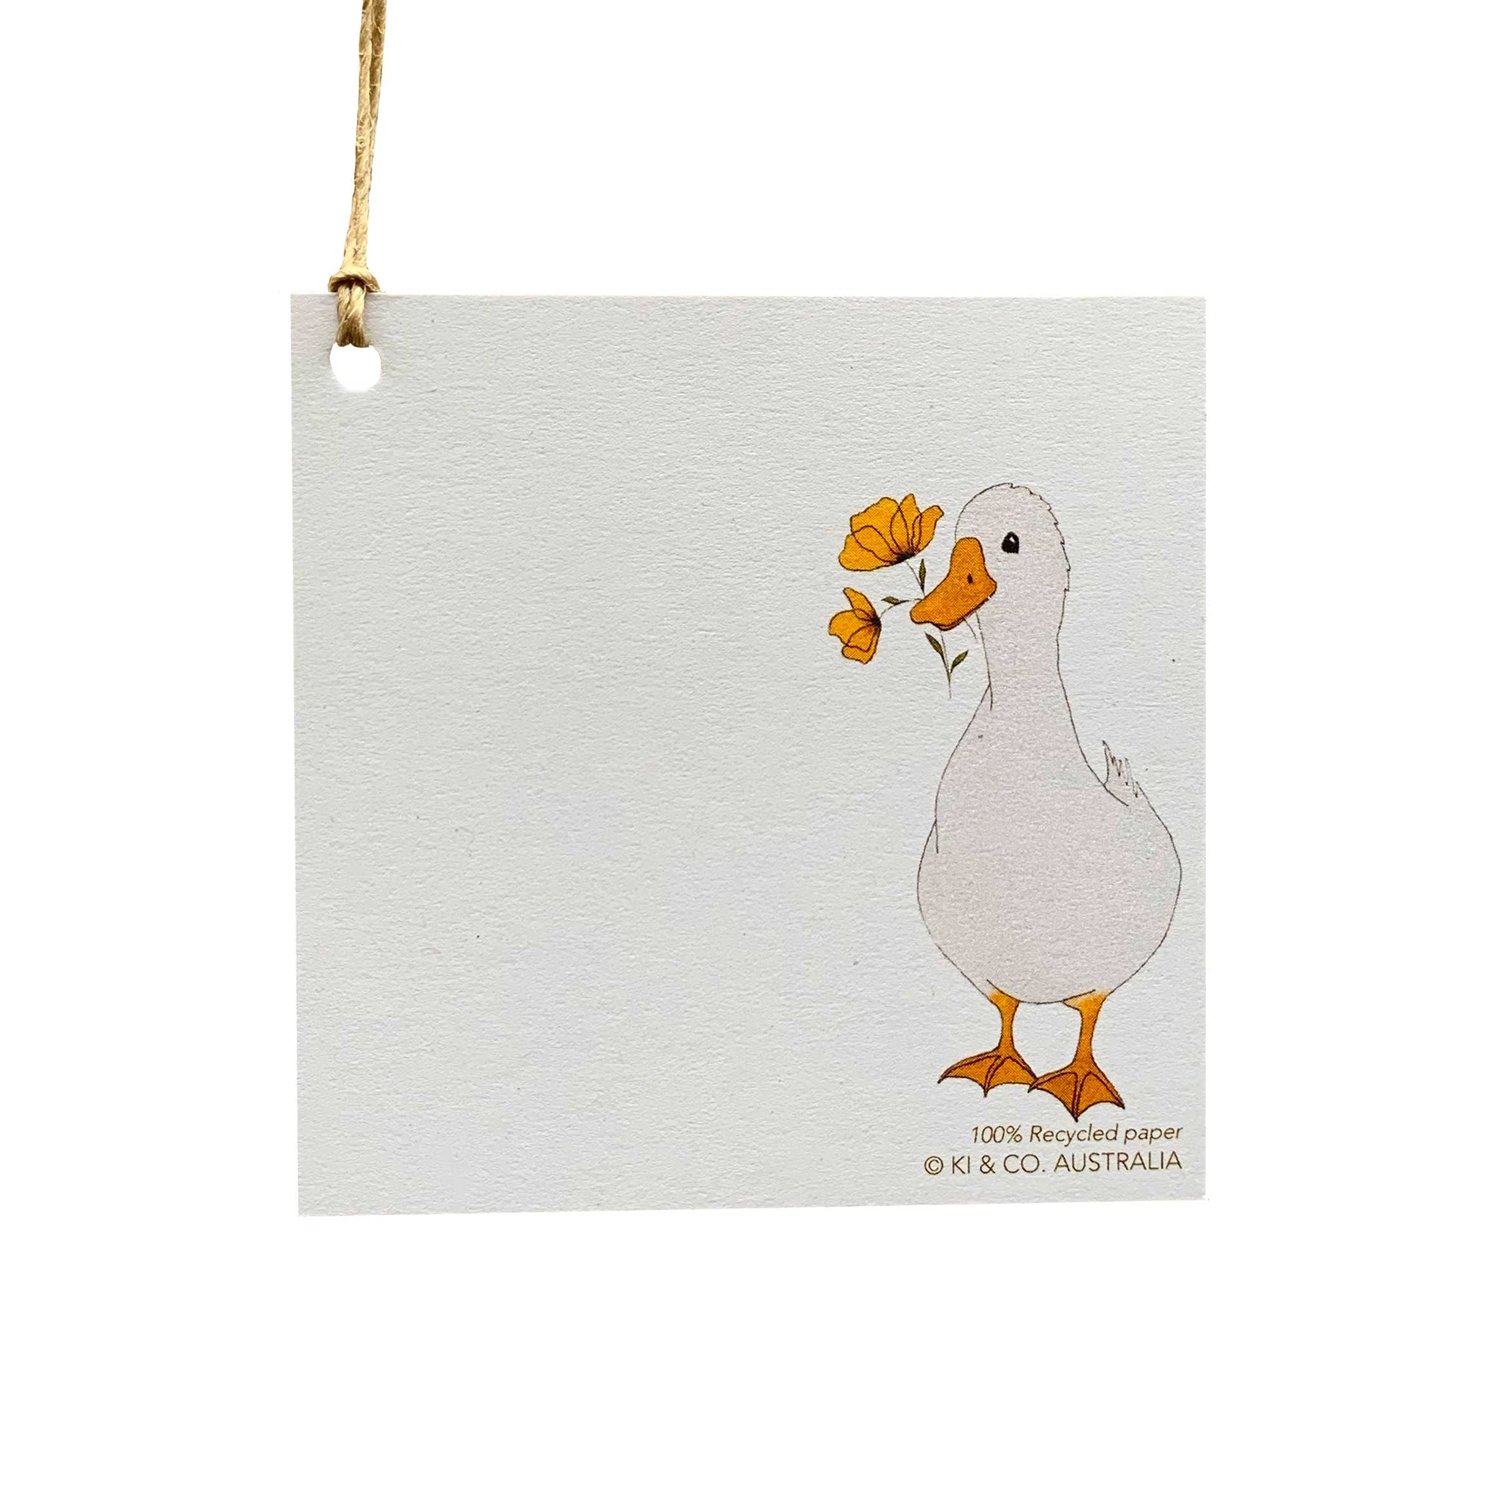 Image of Australian made gift tag - Goose with yellow flowers